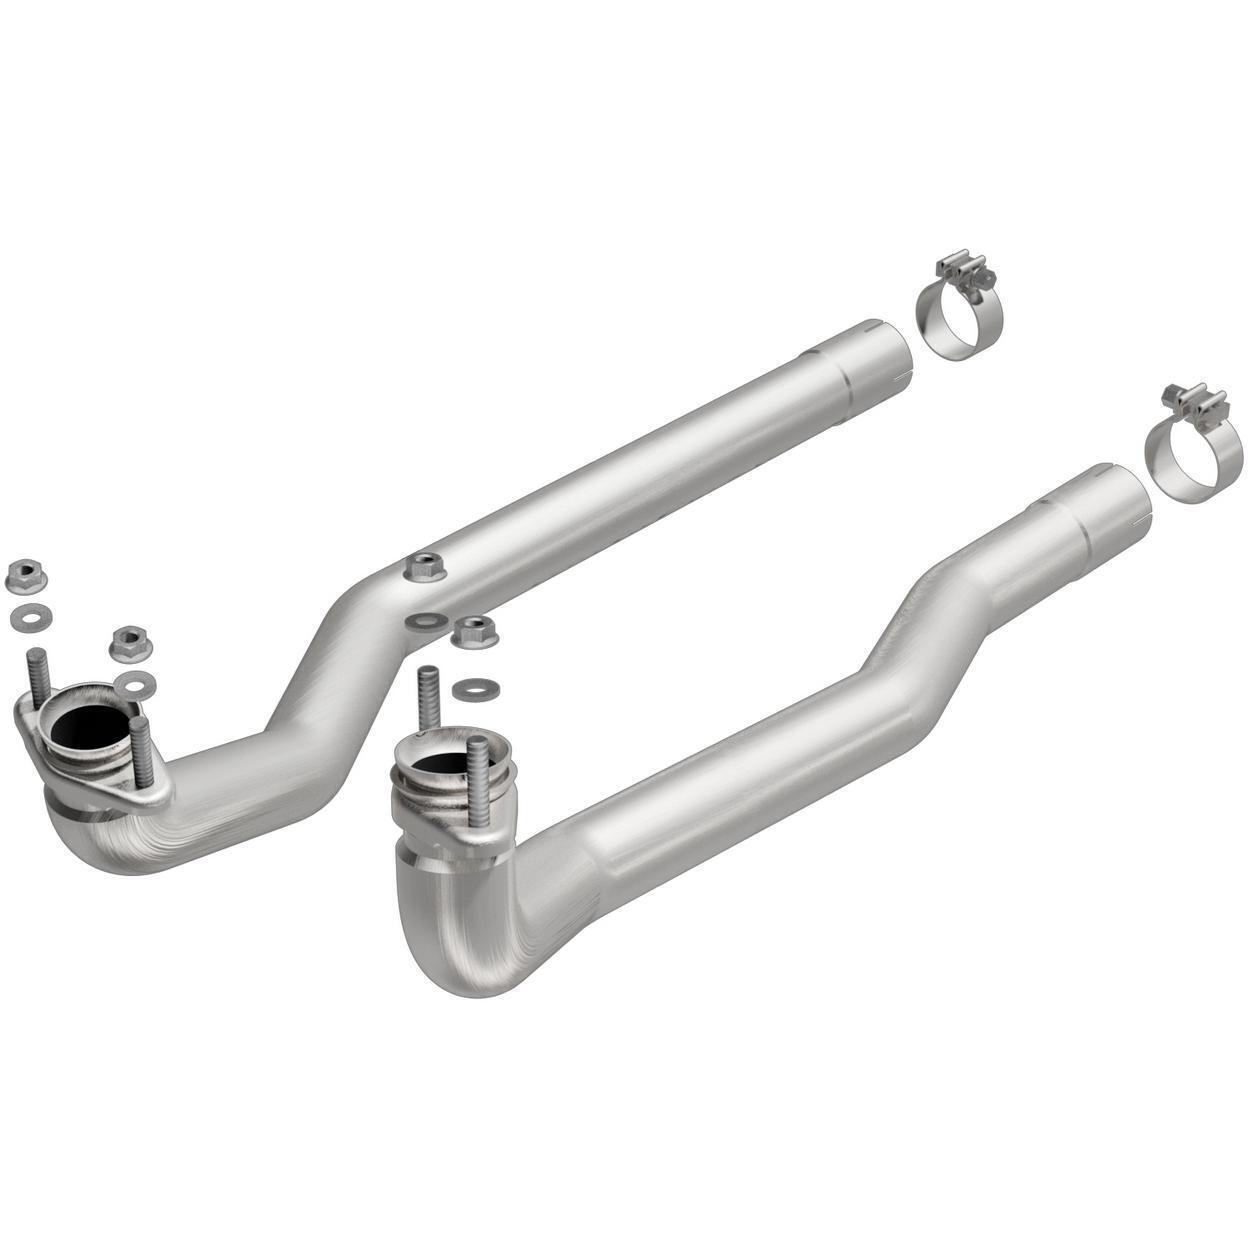 Exhaust and Tail Pipes for 1964-1967 Plymouth Belvedere 4.5L V8 GAS OHV